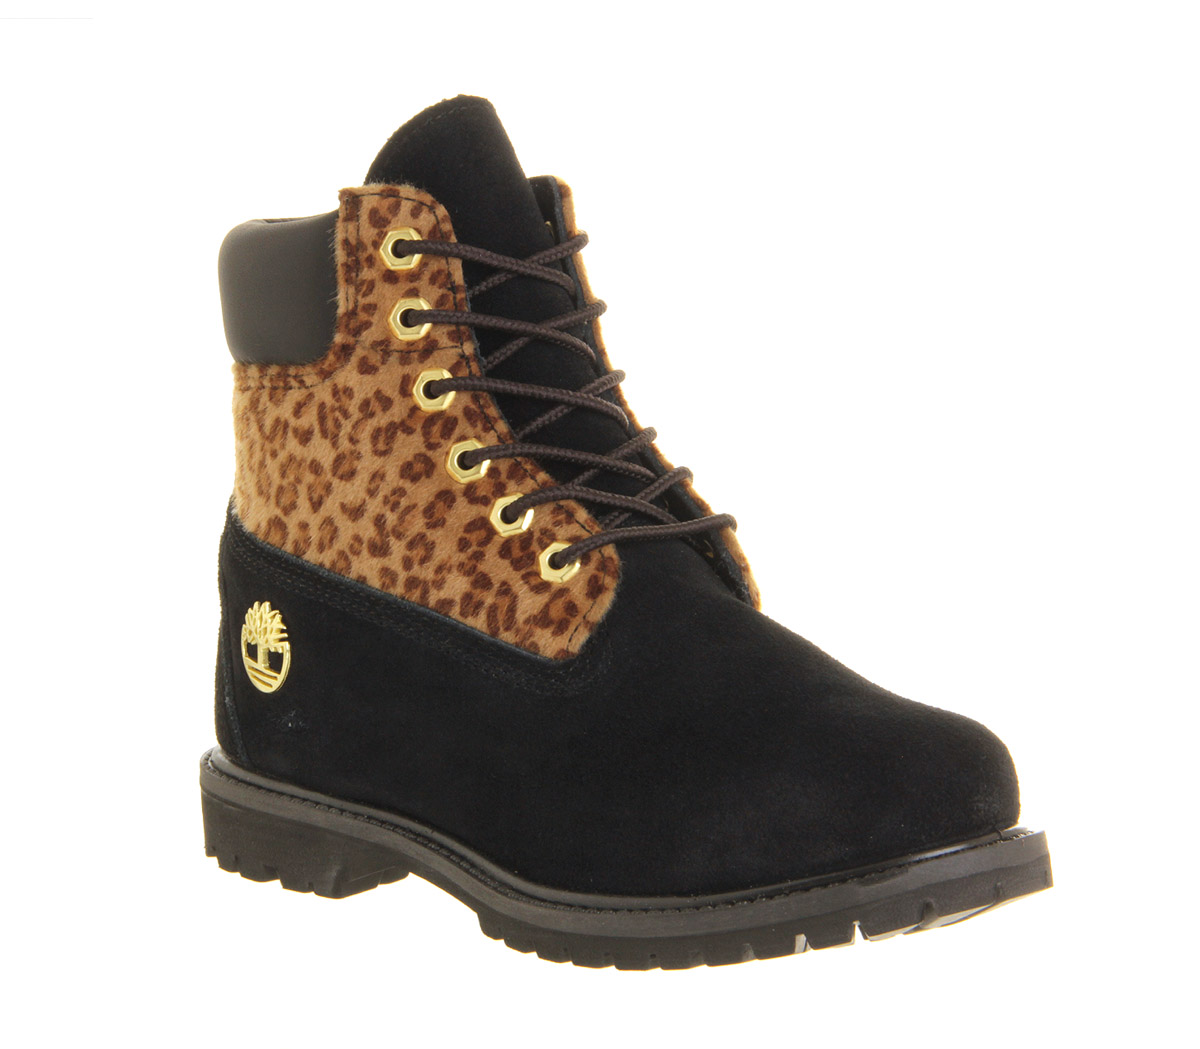 Boots Black Leopard - Ankle Boots